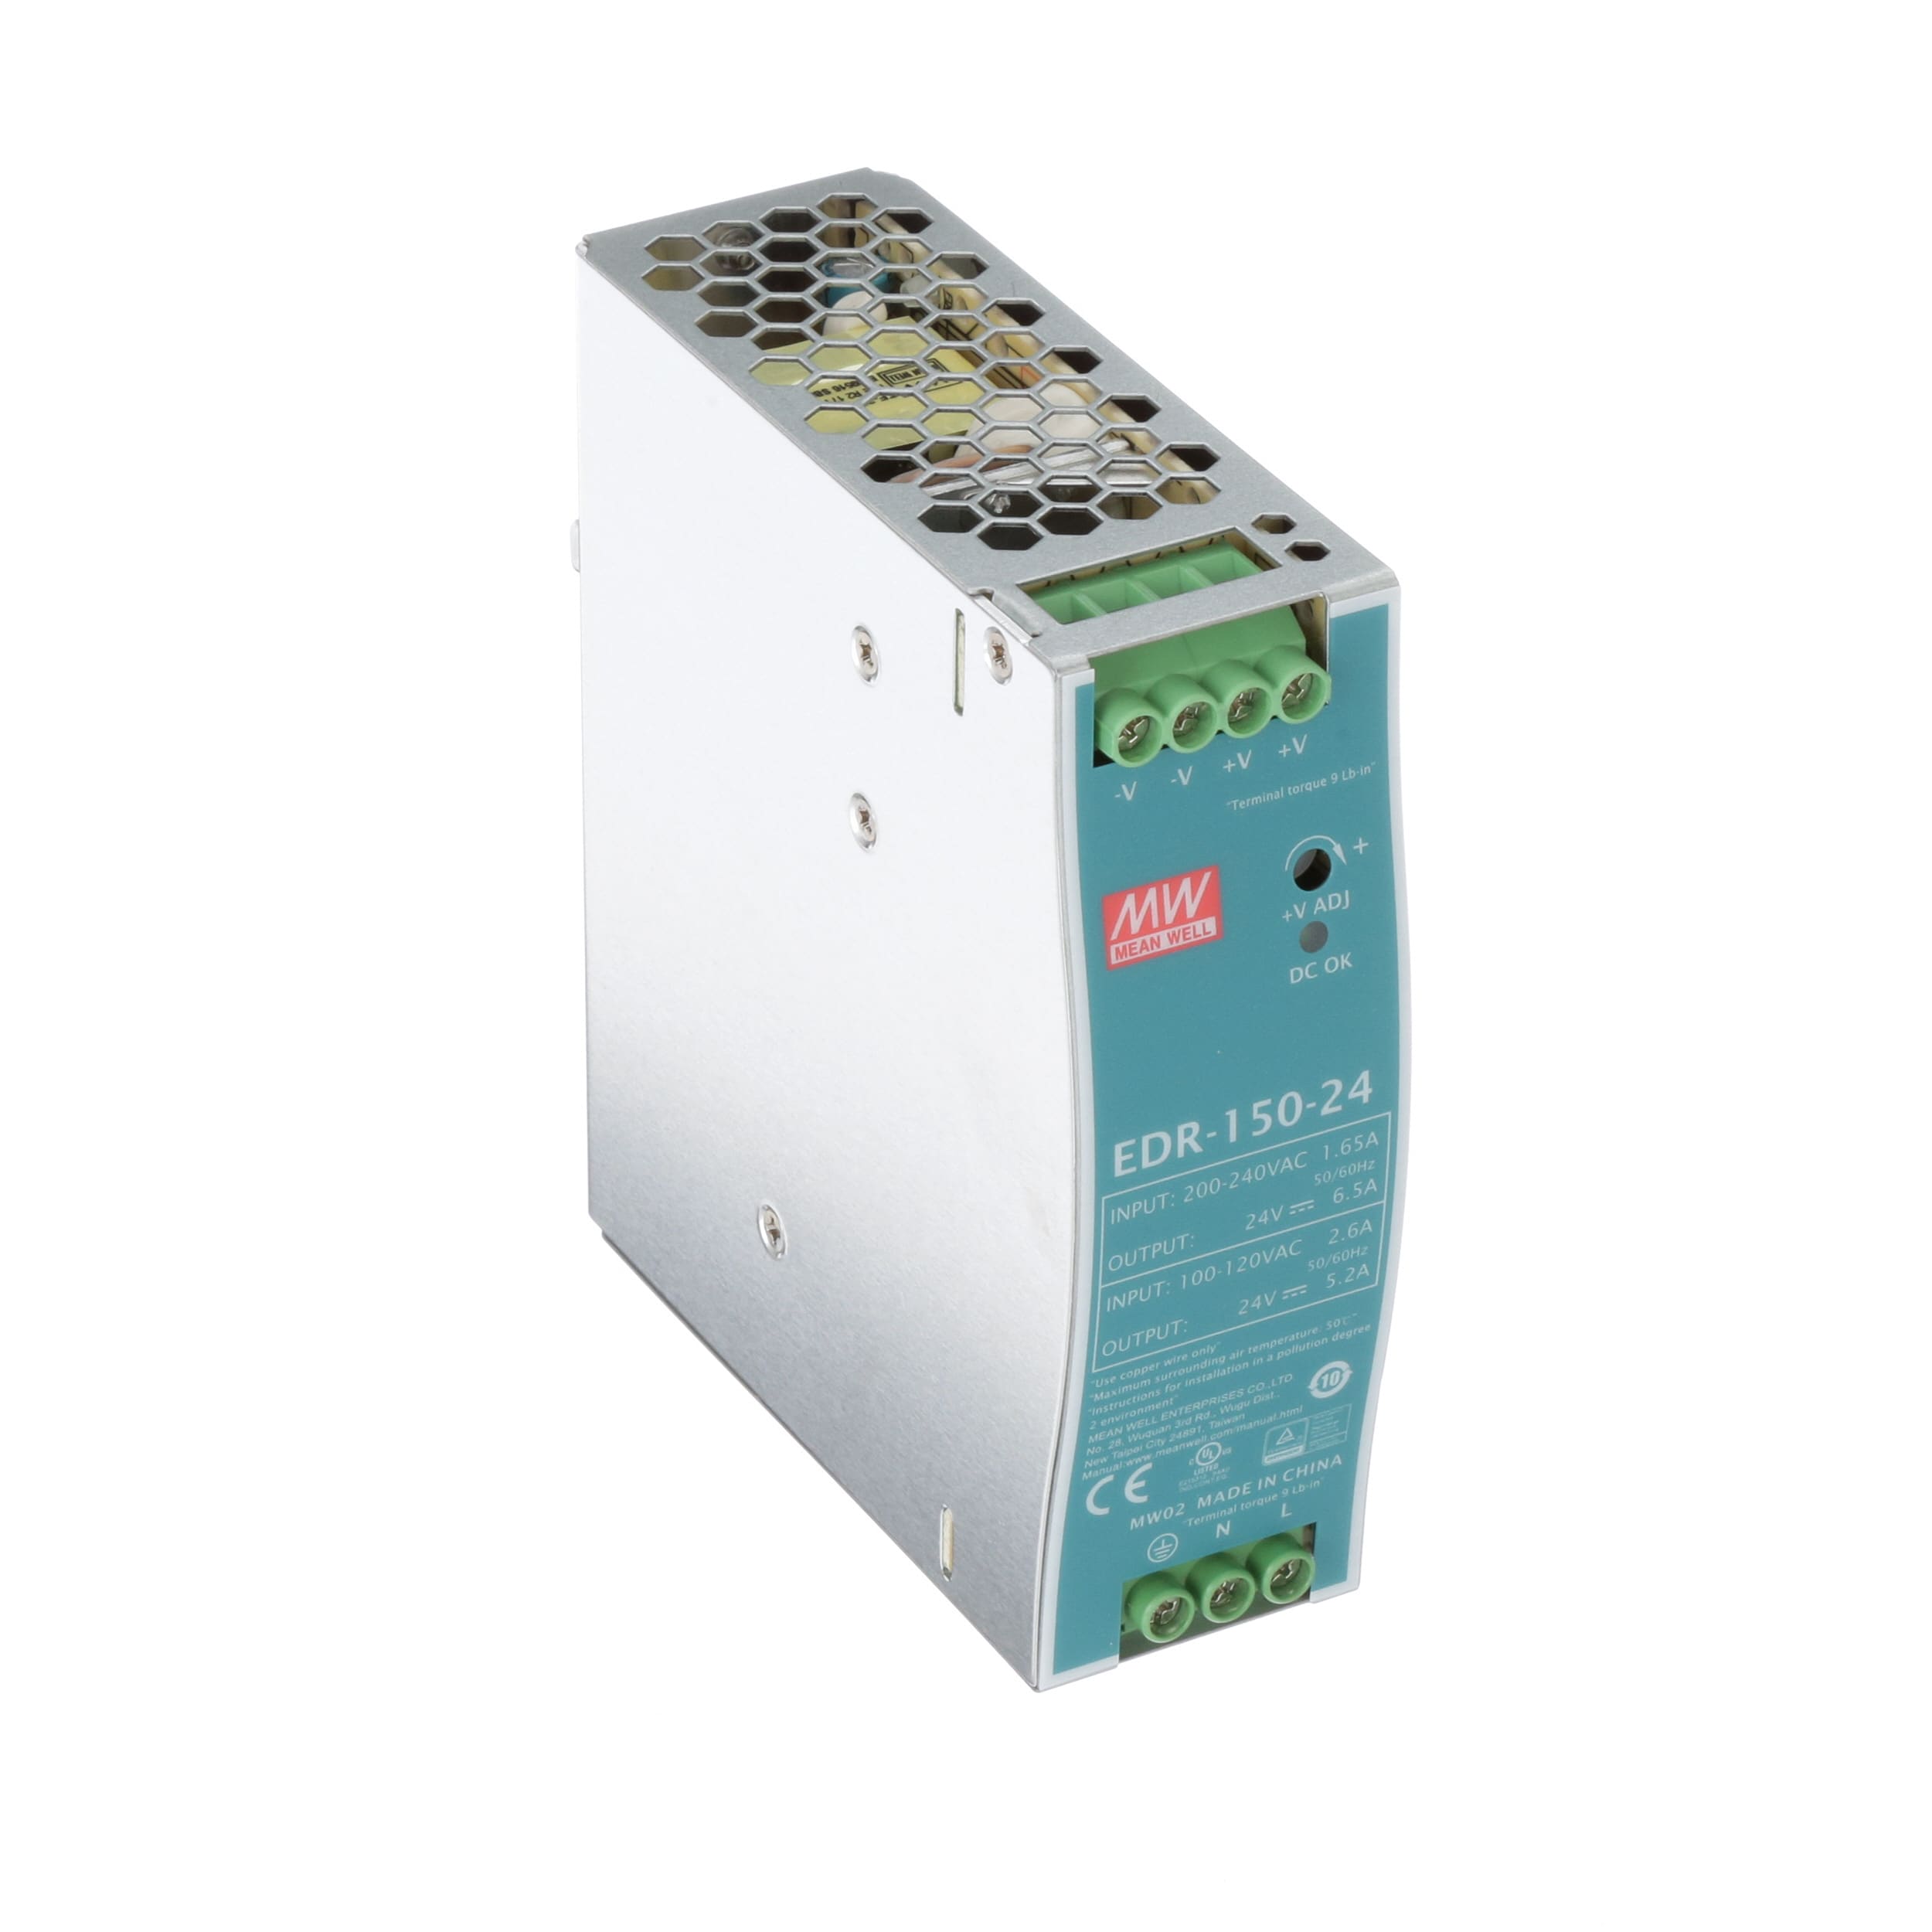 MEAN WELL EDR-150-24 Power Supply, AC-DC, 24V,6.5A, 180-264V In,  Enclosed, DIN Rail Mount, EDR Series RS